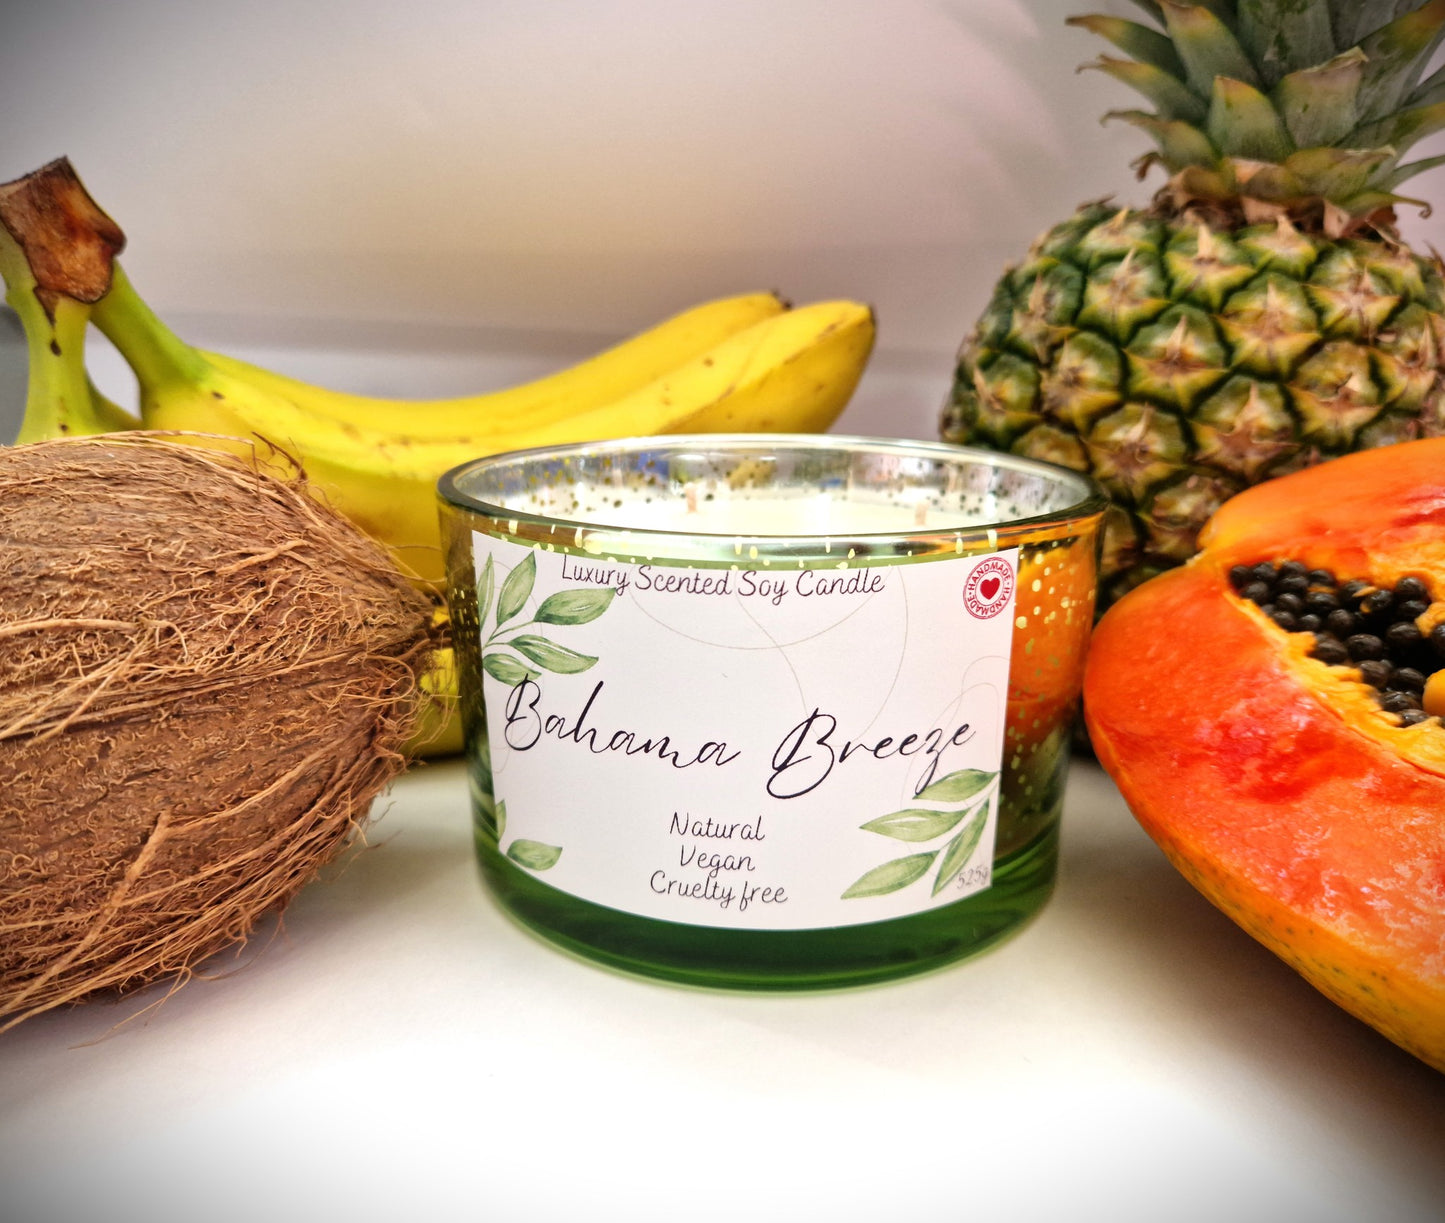 Bahama Breeze Luxury Scented Soy Candle